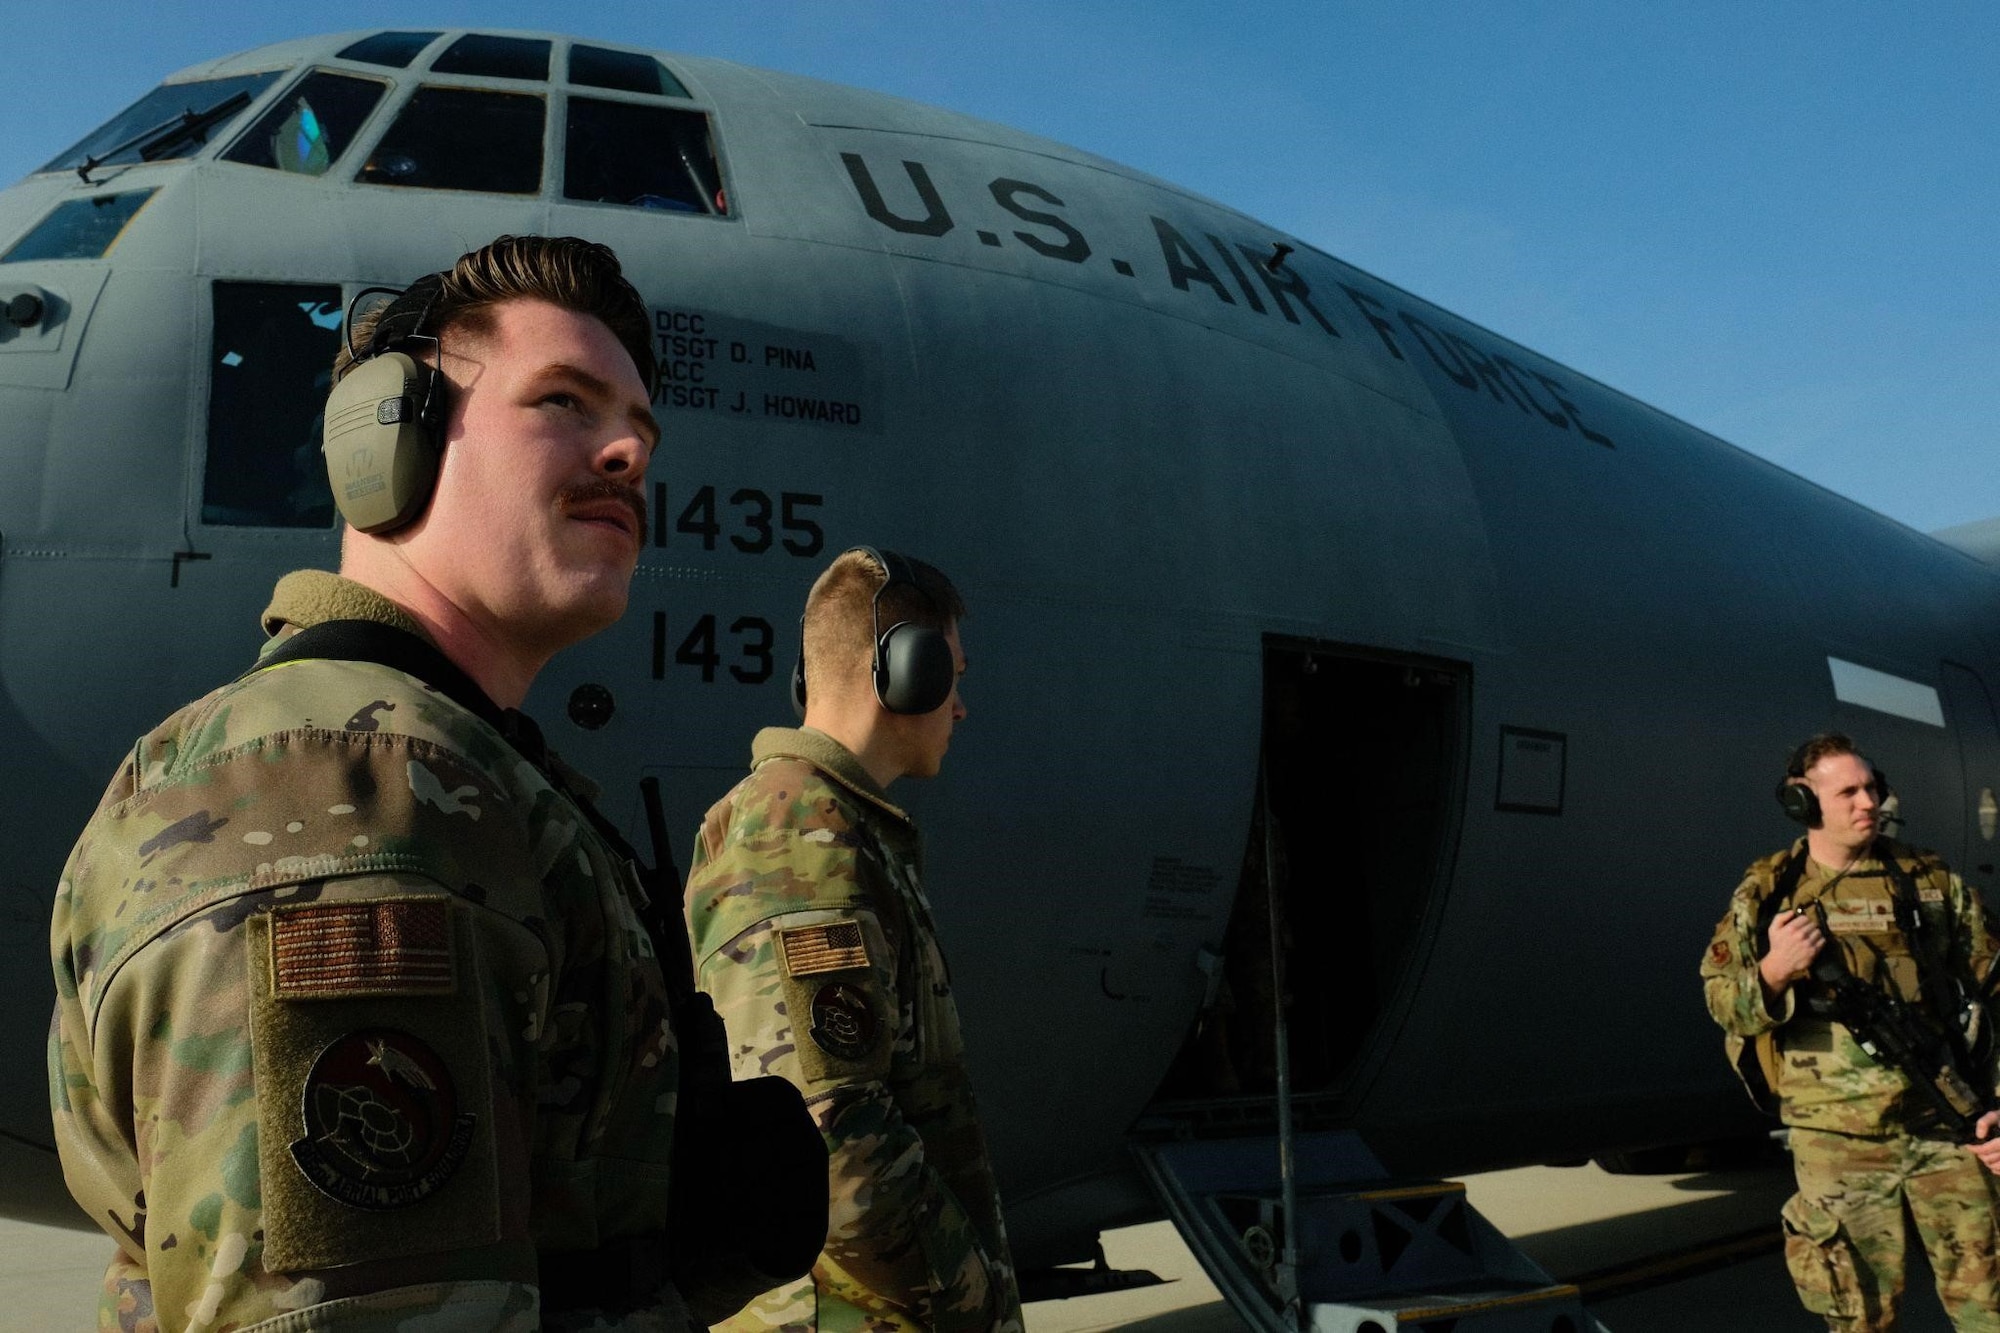 U.S. Air Force Senior Airman Colden Fuller, 305th Aerial Port Squadron fleet service technician, overlooks as service members assigned to the 621st Contingency Response Wing board a C-130 Hercules as part of exercise Jersey Devil on Joint Base McGuire-Dix-Lakehurst, N.J., Jan. 11, 2023. Jersey Devil 23, a U.S. Air Force mobility exercise hosted by the 621st CRW, tests the abilities of multi-capable airmen to rapidly deploy, establish and control airbases alongside joint allies and partners. (U.S. Air Force photo by Senior Airman Joseph Morales)